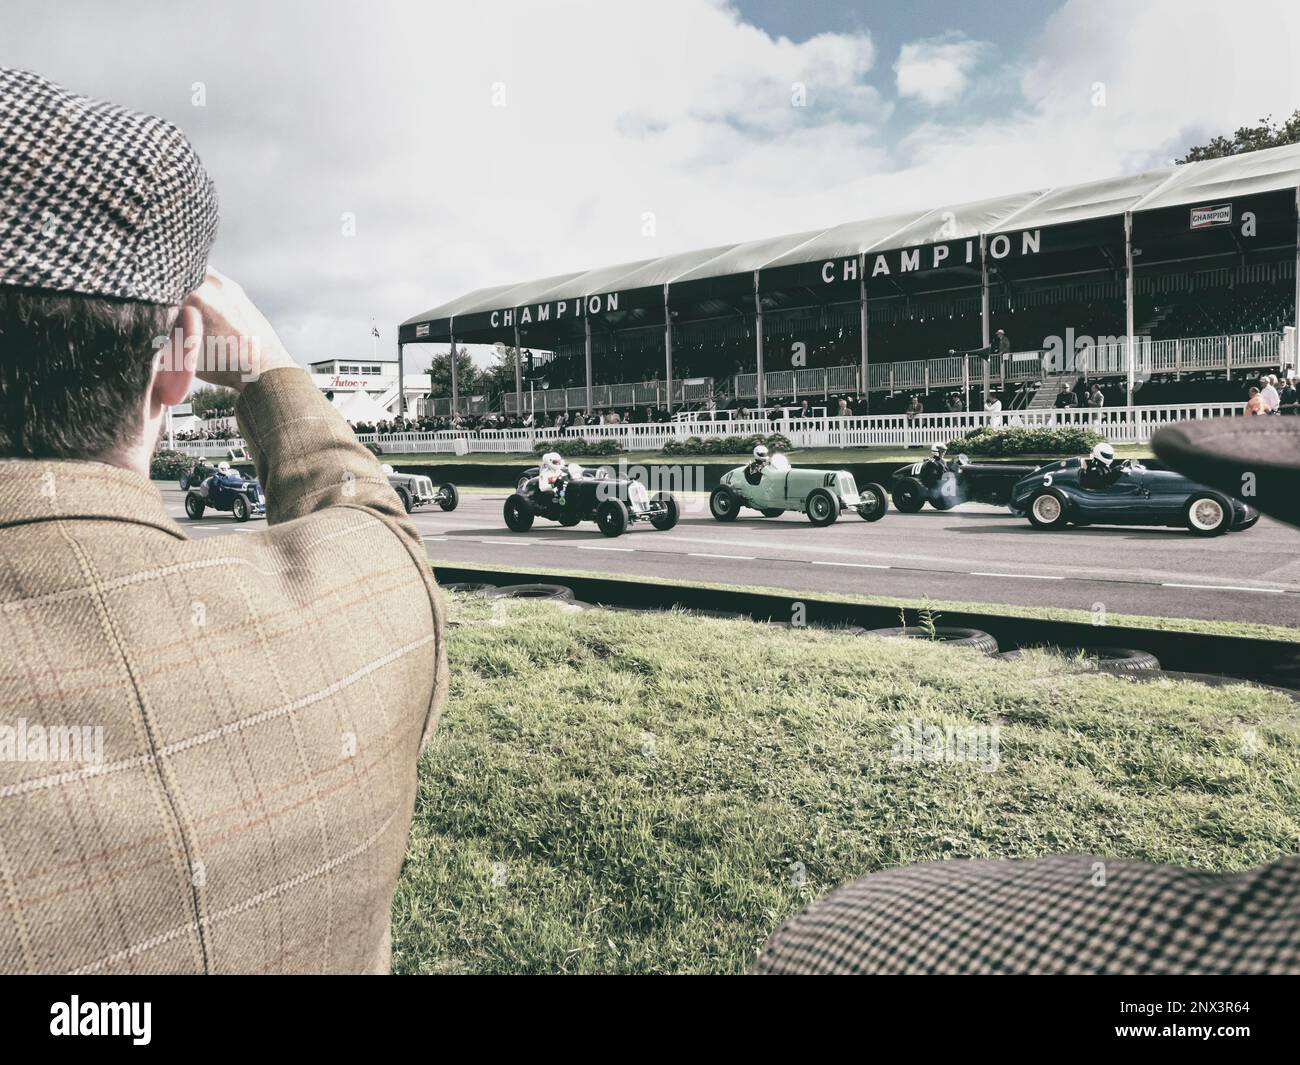 Goodwood Revival 2015. Vintage single seater race Stock Photo